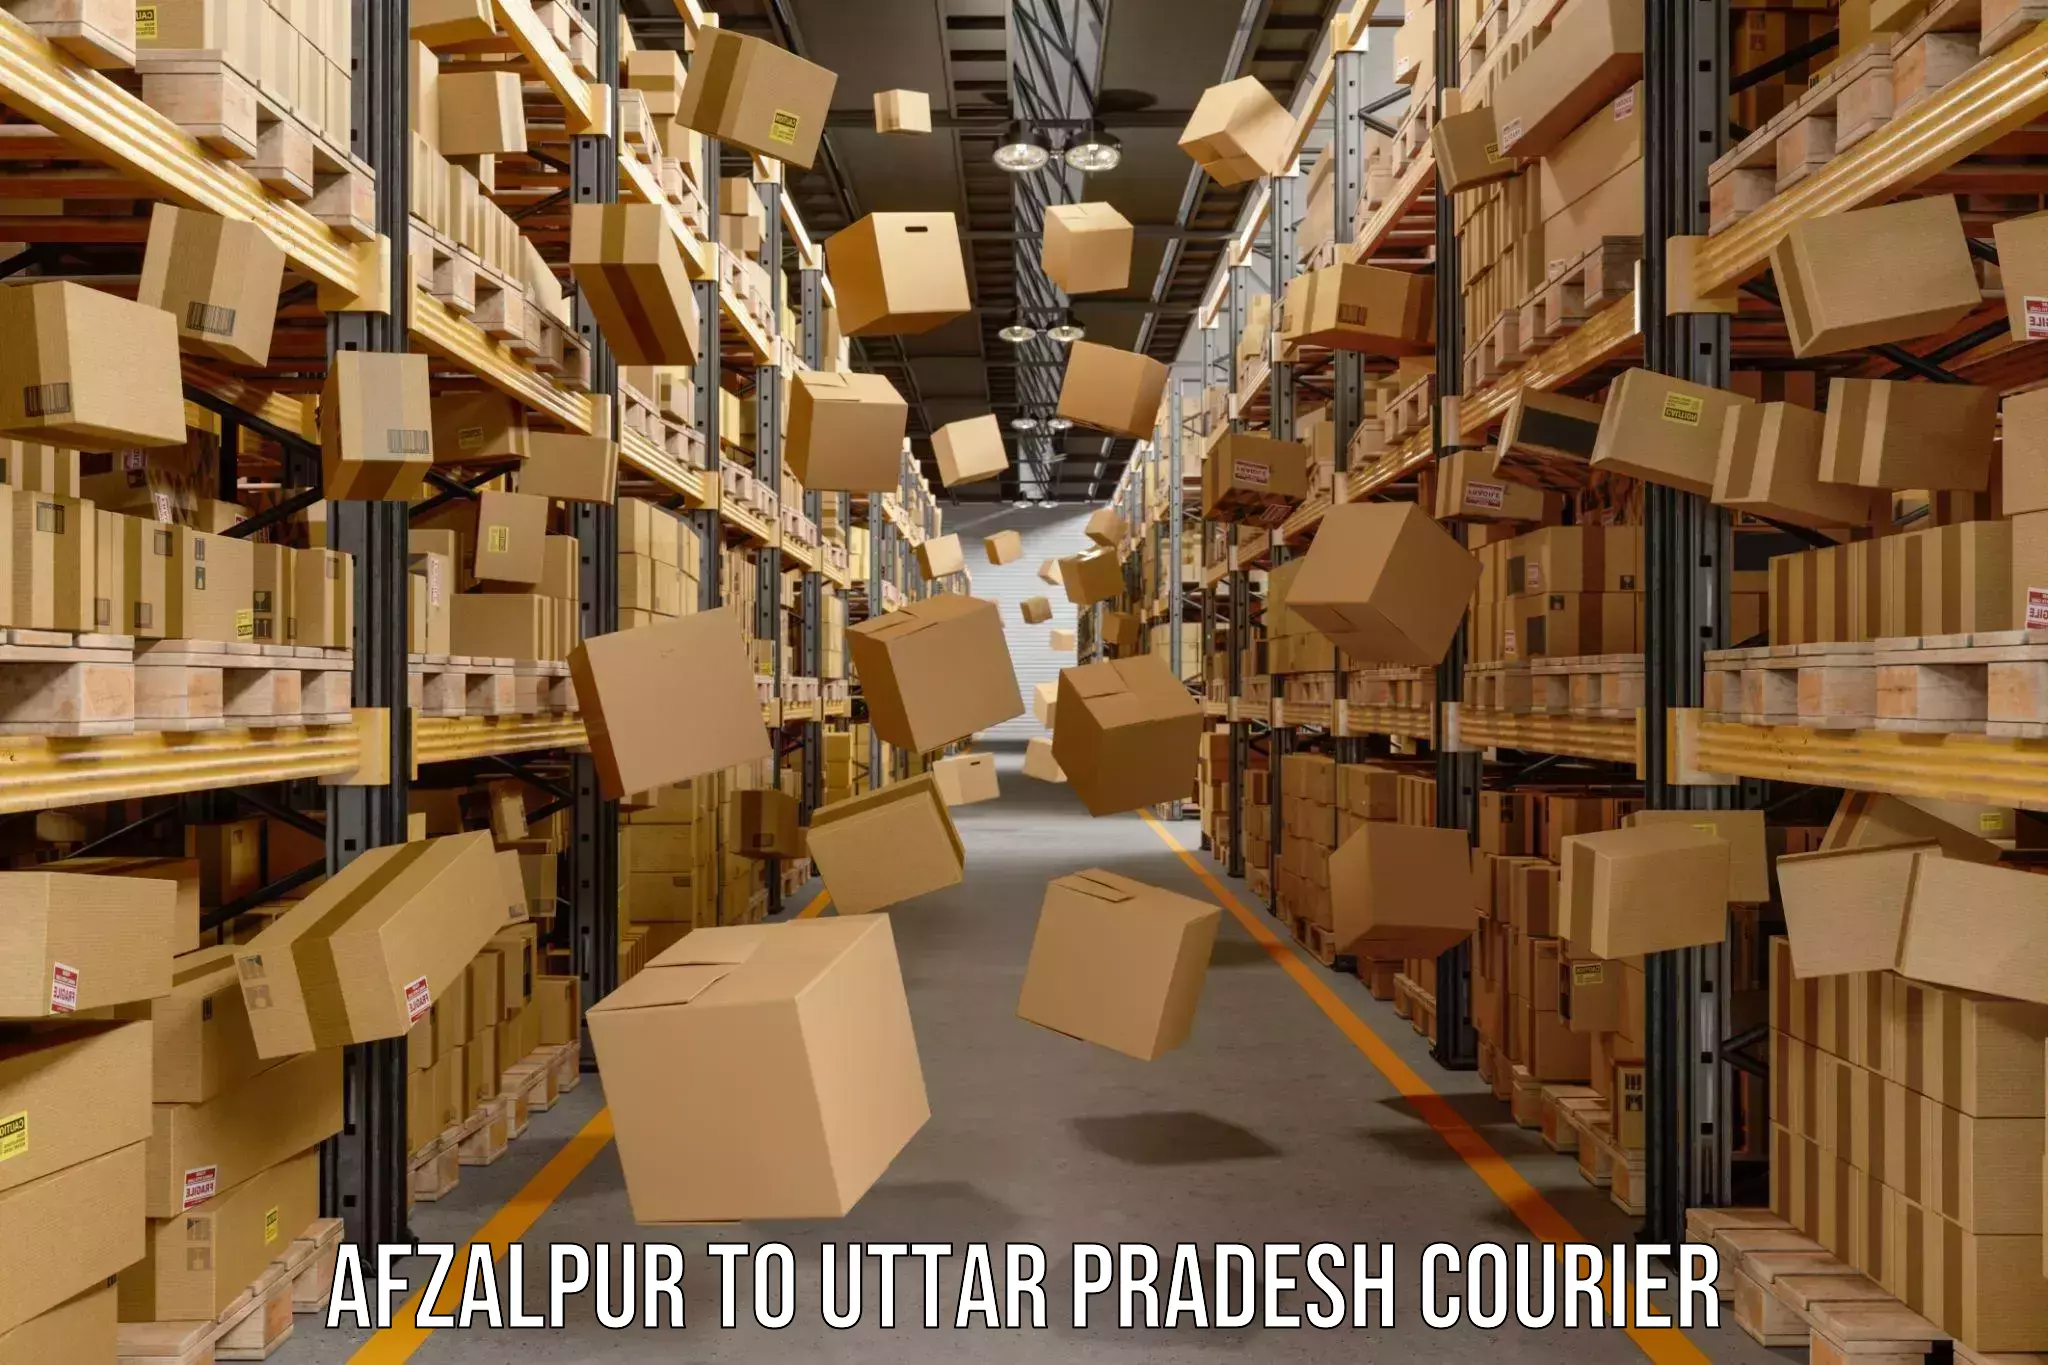 Efficient courier operations Afzalpur to Dayalbagh Educational Institute Agra